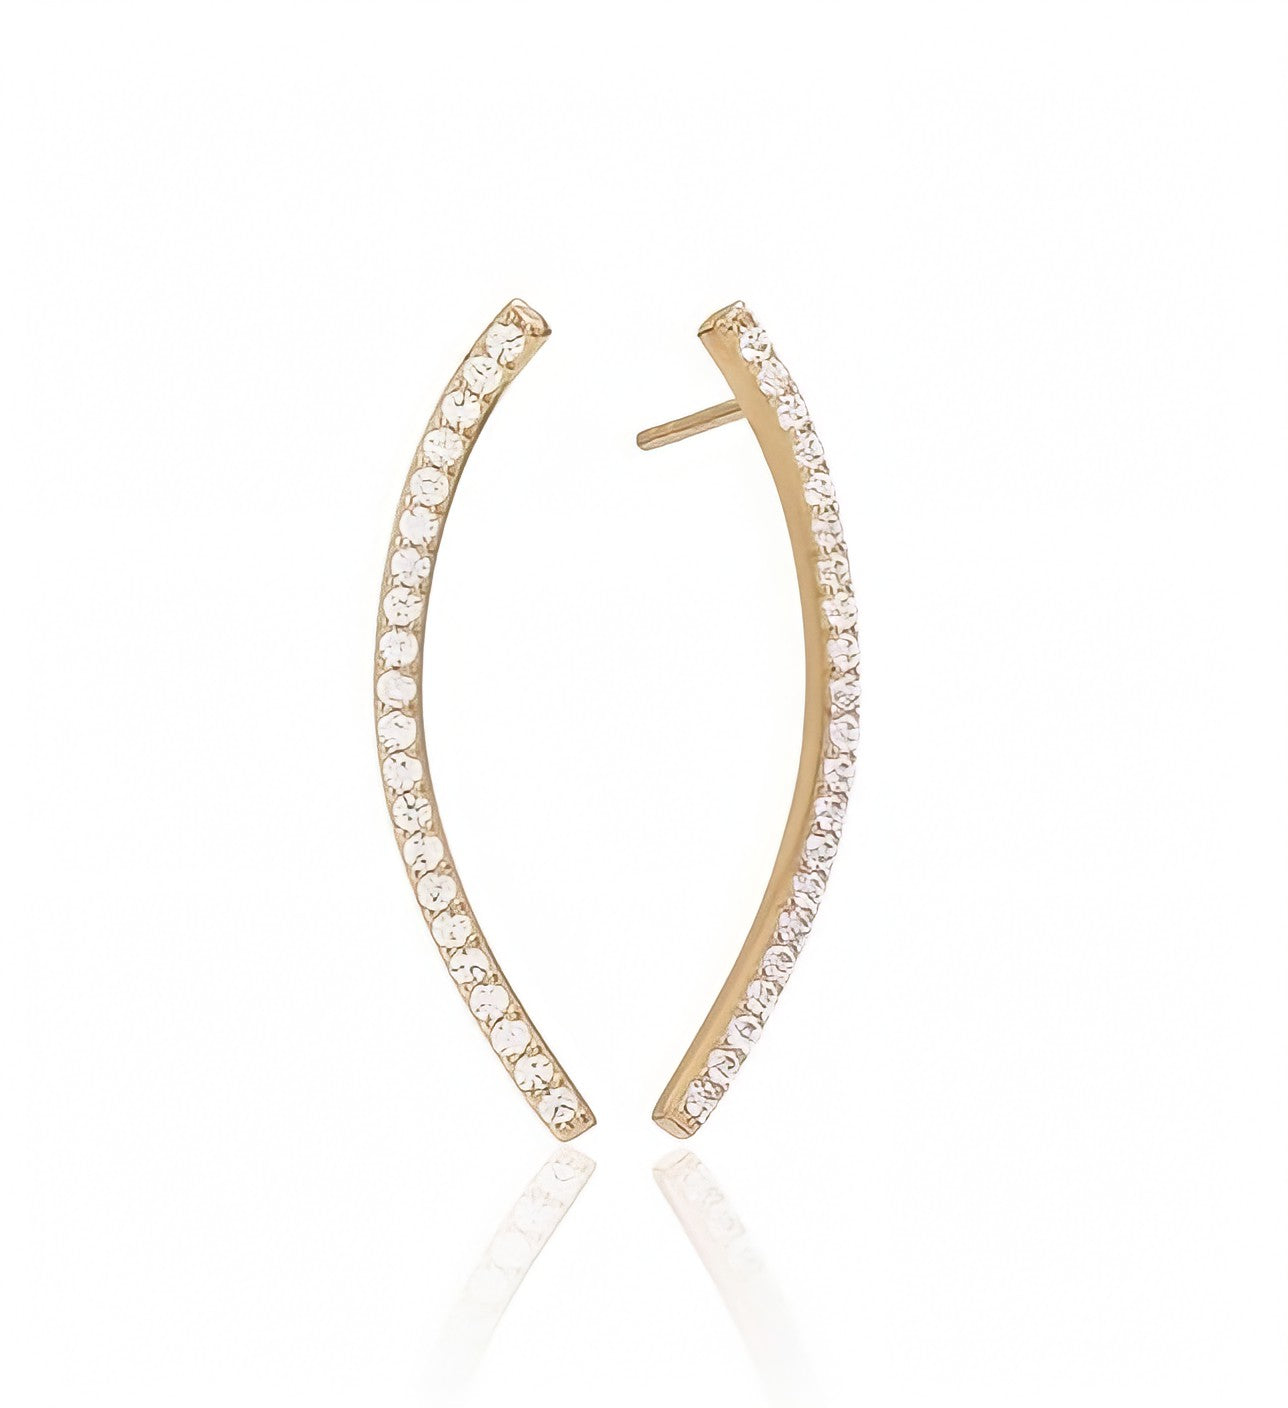 Sif Jakobs Fucino Grande Earrings - 18k Gold Plated Sterling Silver with White Zirconia